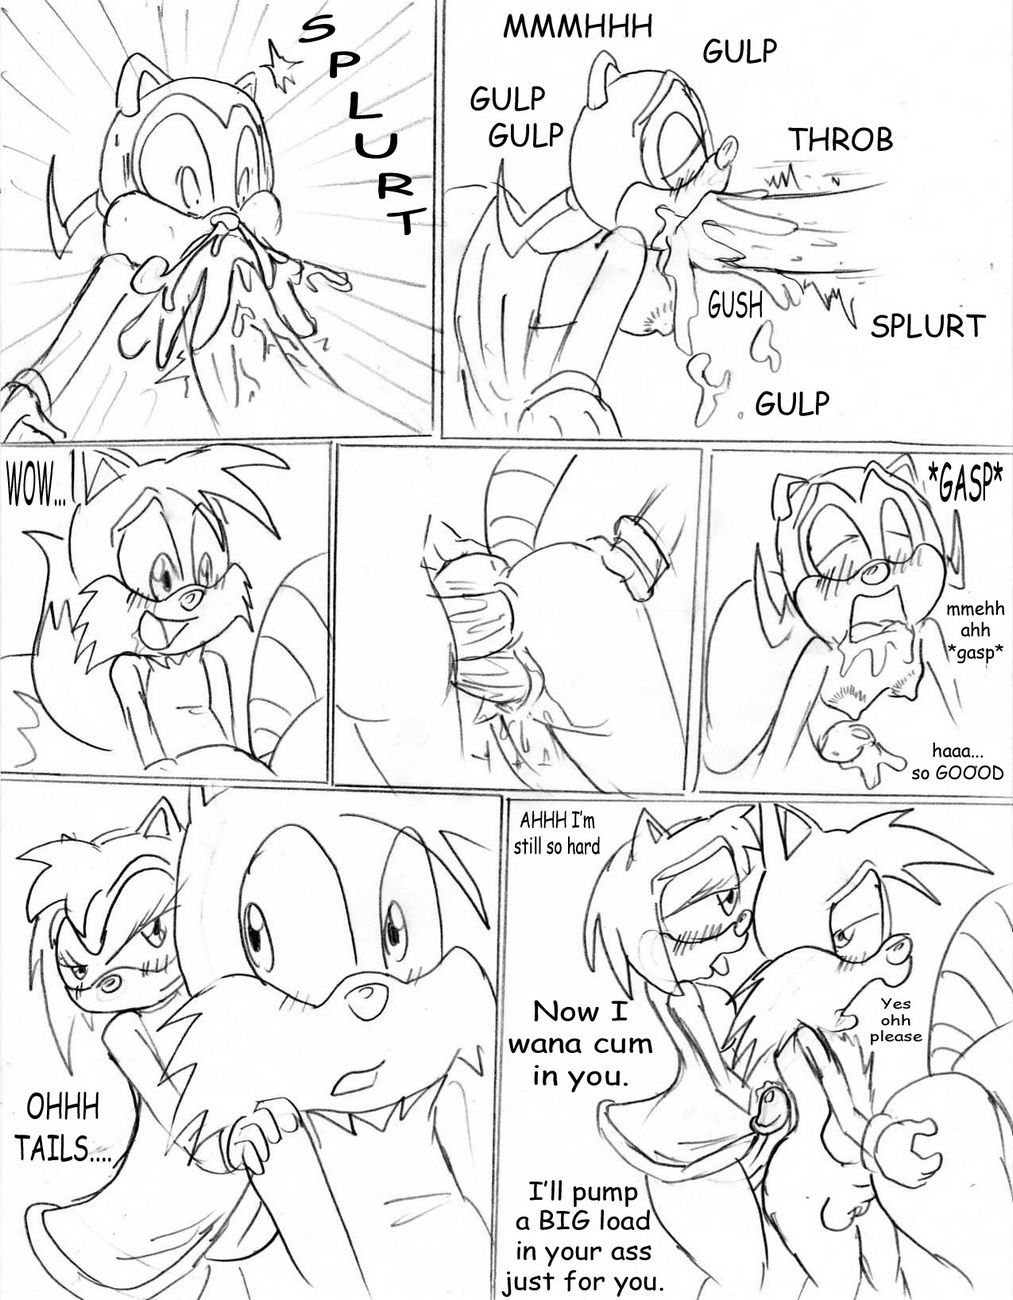 Tails' Wake Up Call page 14